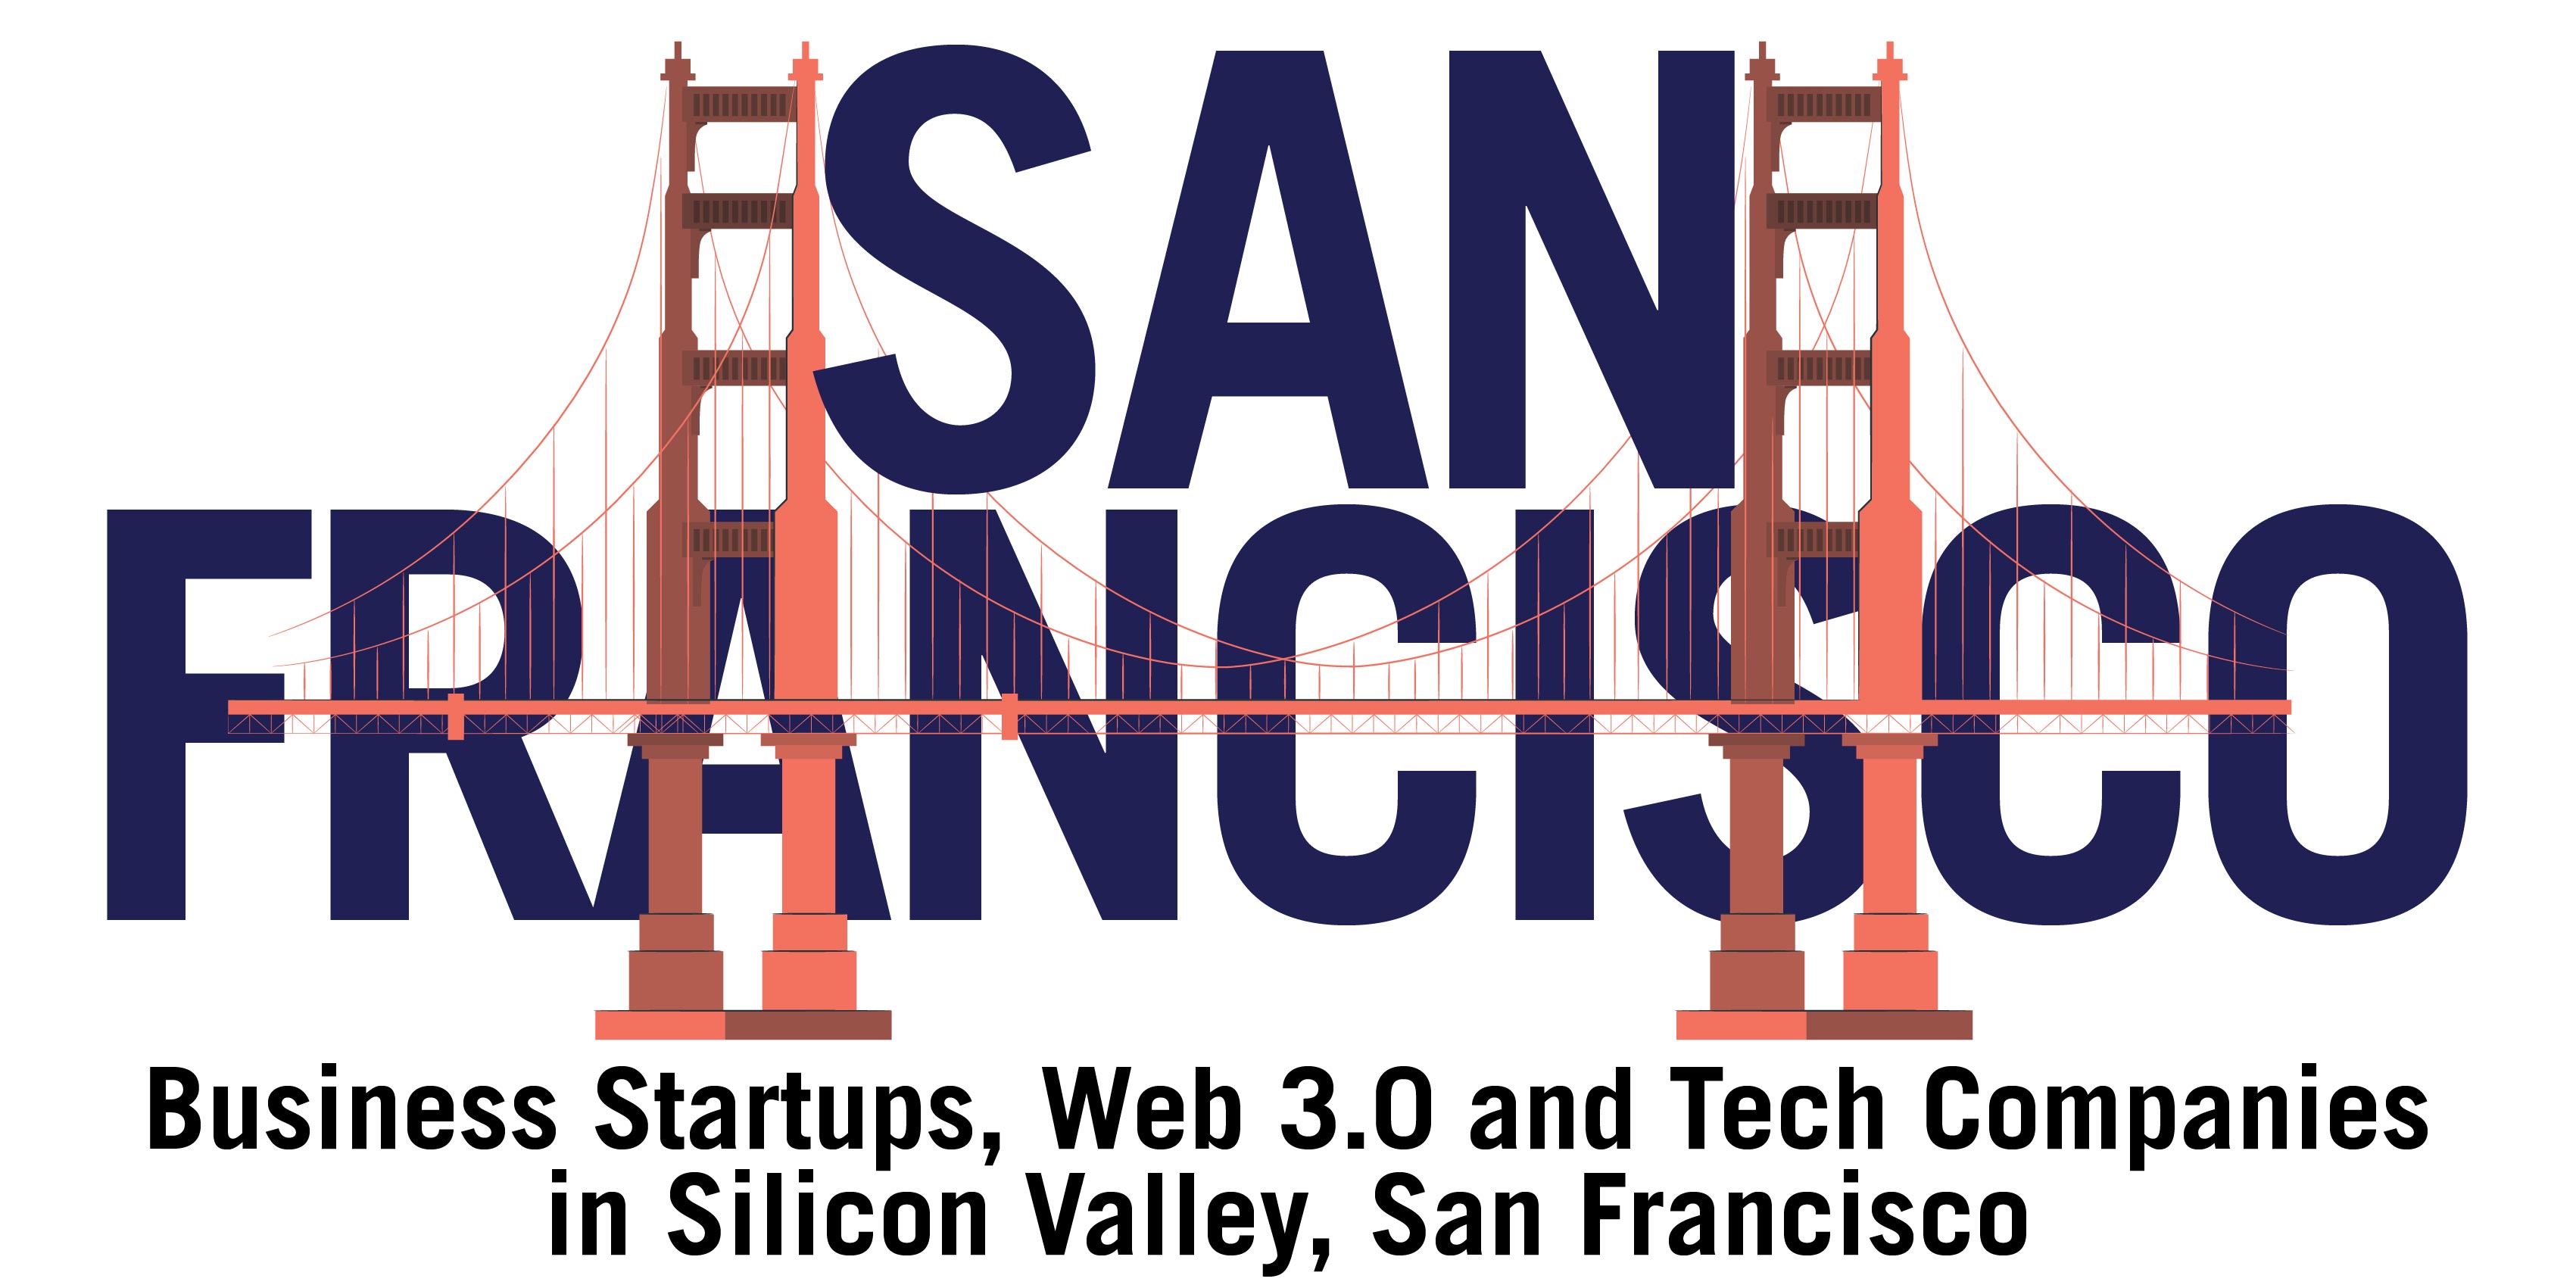 Business Startups, Web 3.0 and Tech Companies in Silicon Valley, San Francisco